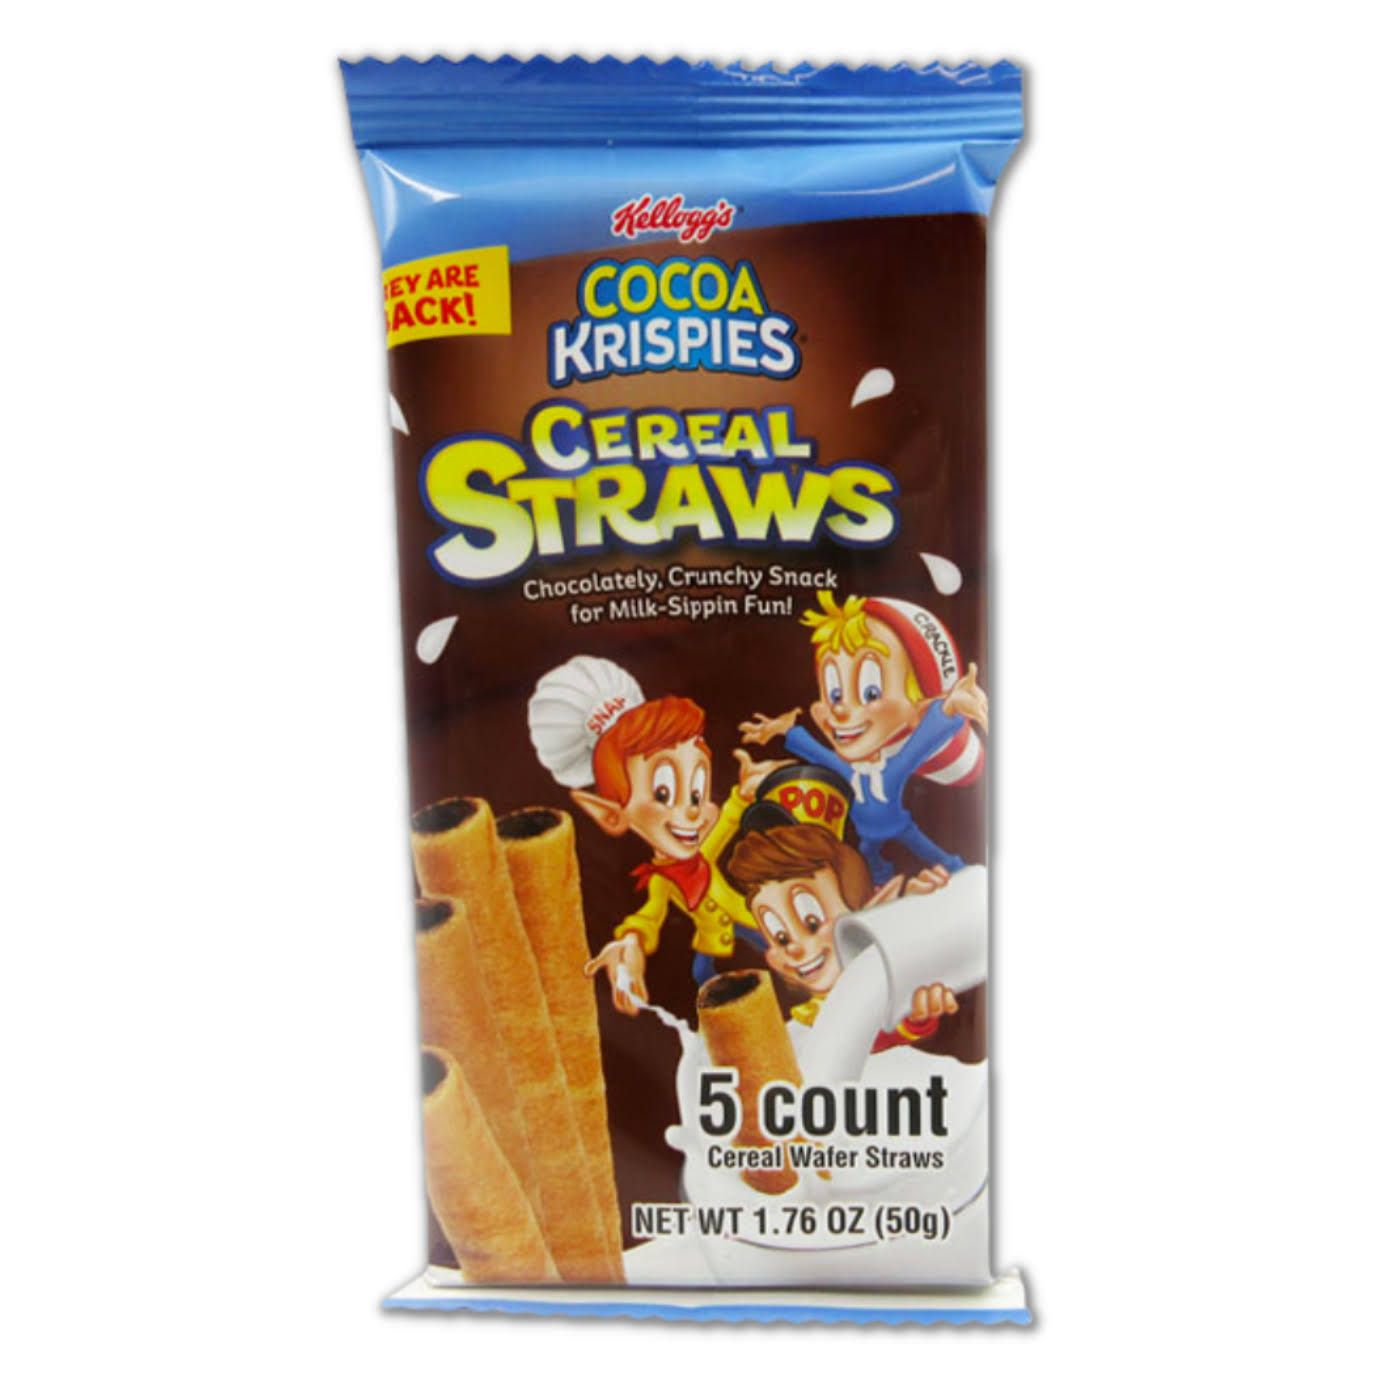 Cocoa Krispies - Cereal Straws